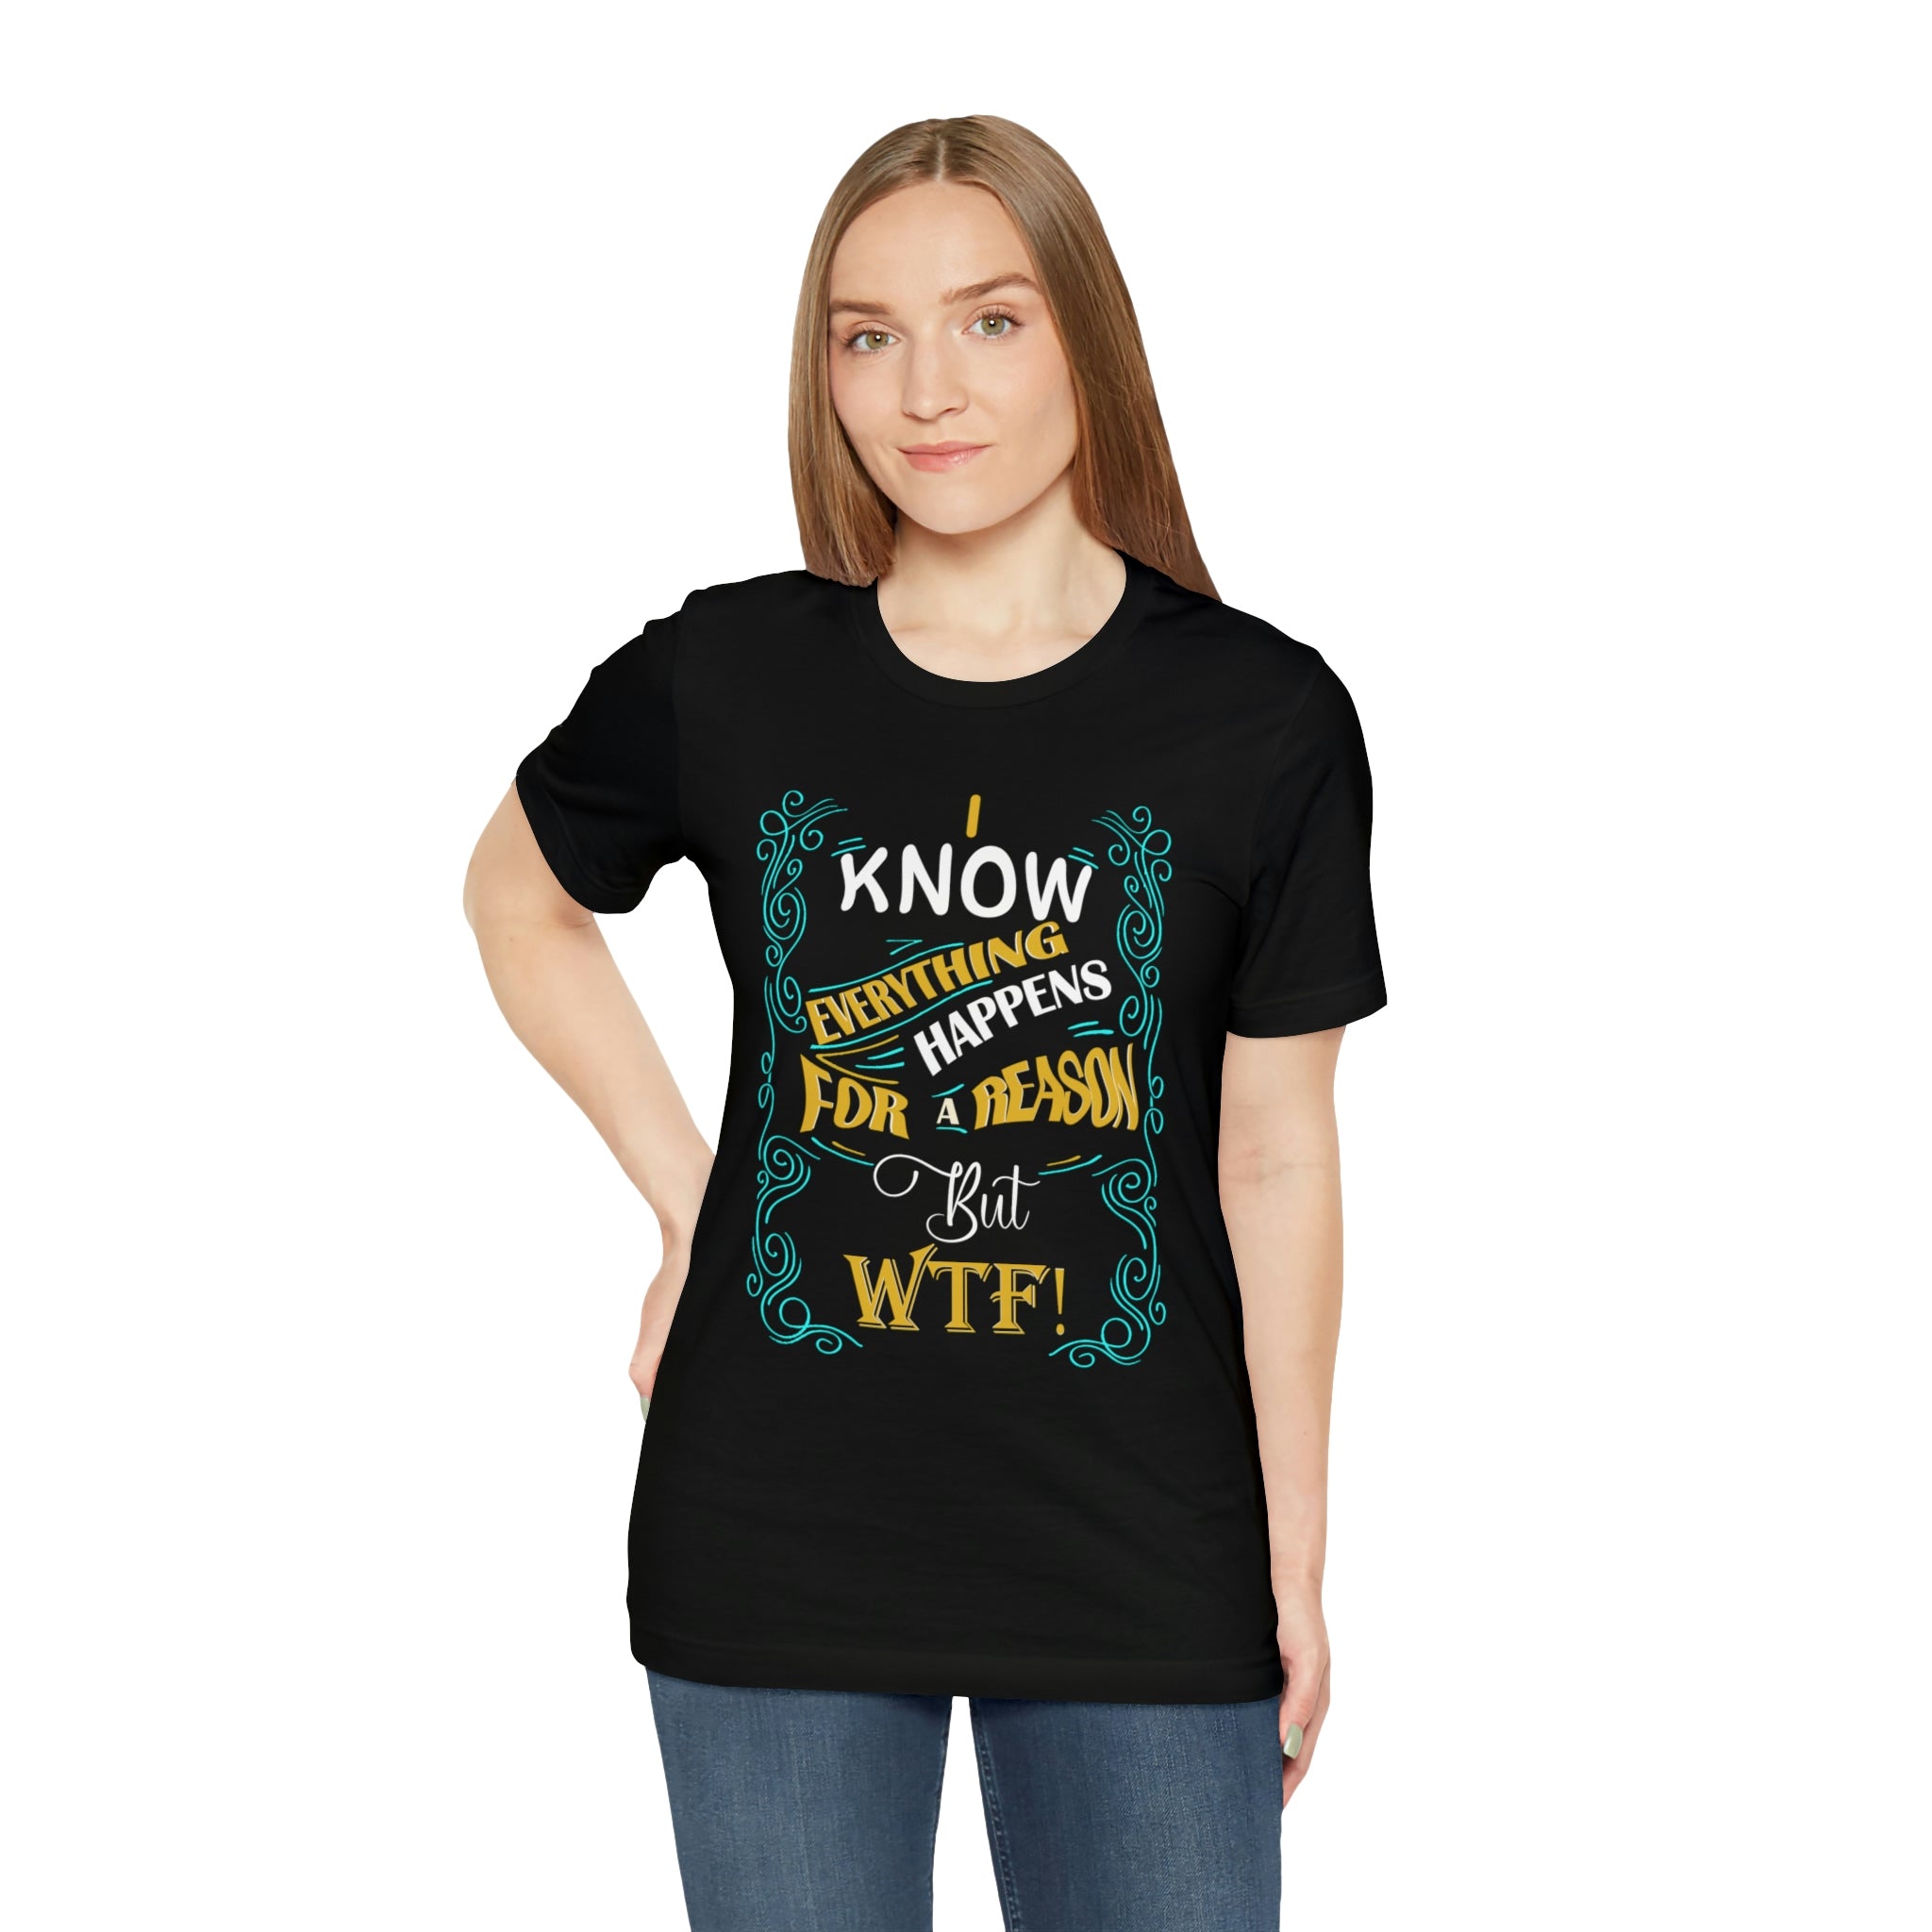 I Know Everything Happens for a Reason Short Sleeve Tee